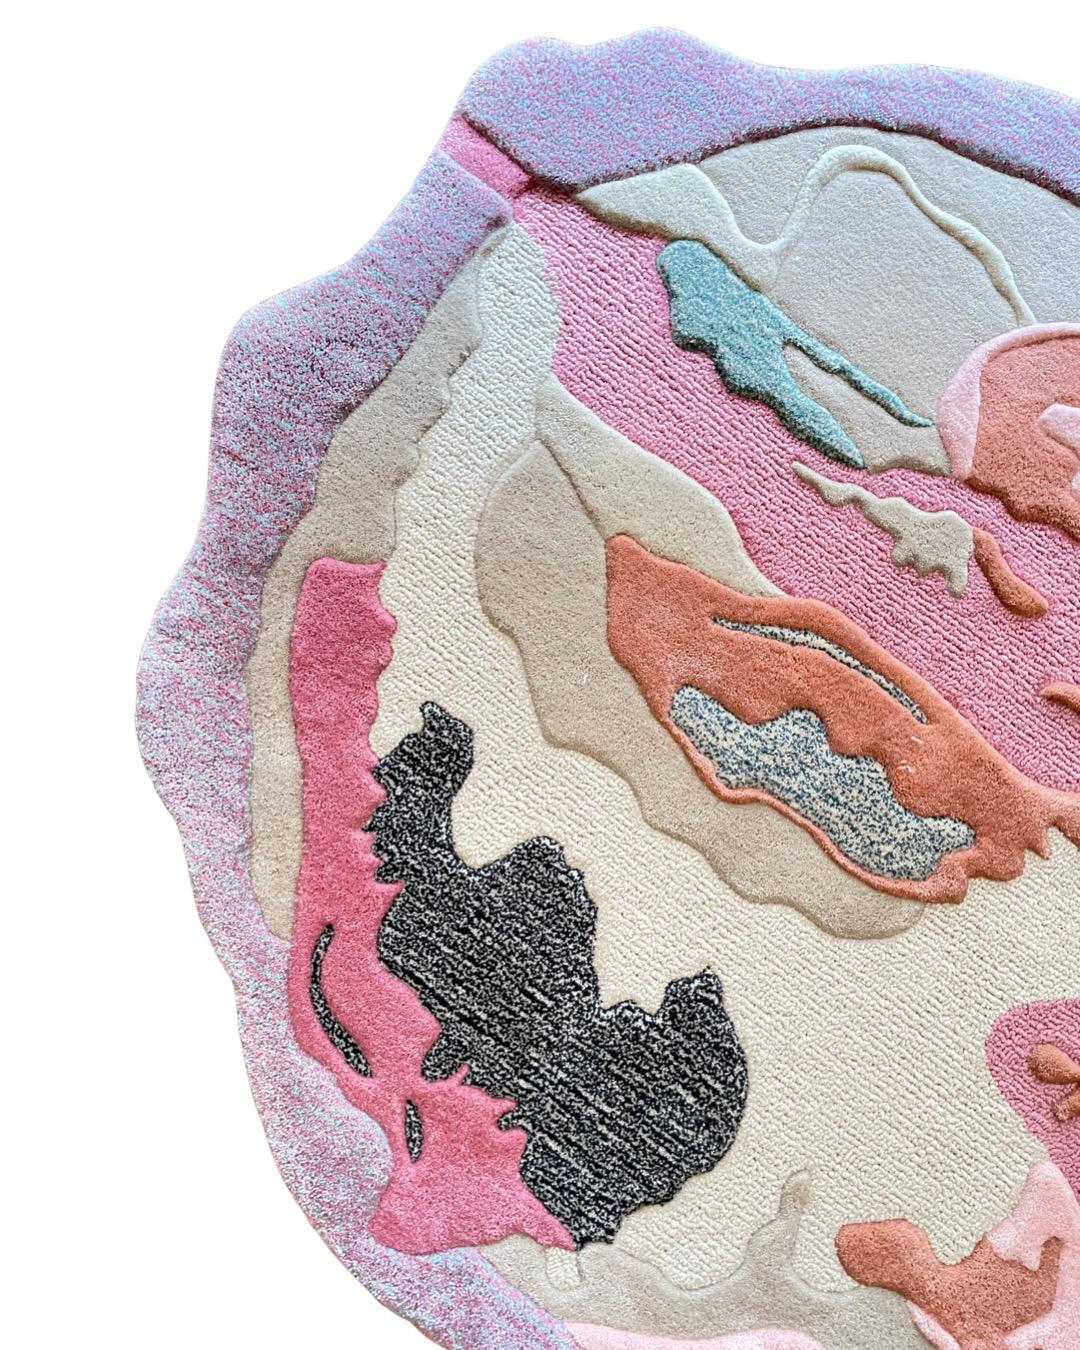 Pink opaque

To fly away like a kite in the sky? Ain't that the fantasy. To have a piece of said fantasy in technicolor? This rug will fulfil that dream to your imagination - and your space.

Original Designed by Rannisa Soraya RAG Home